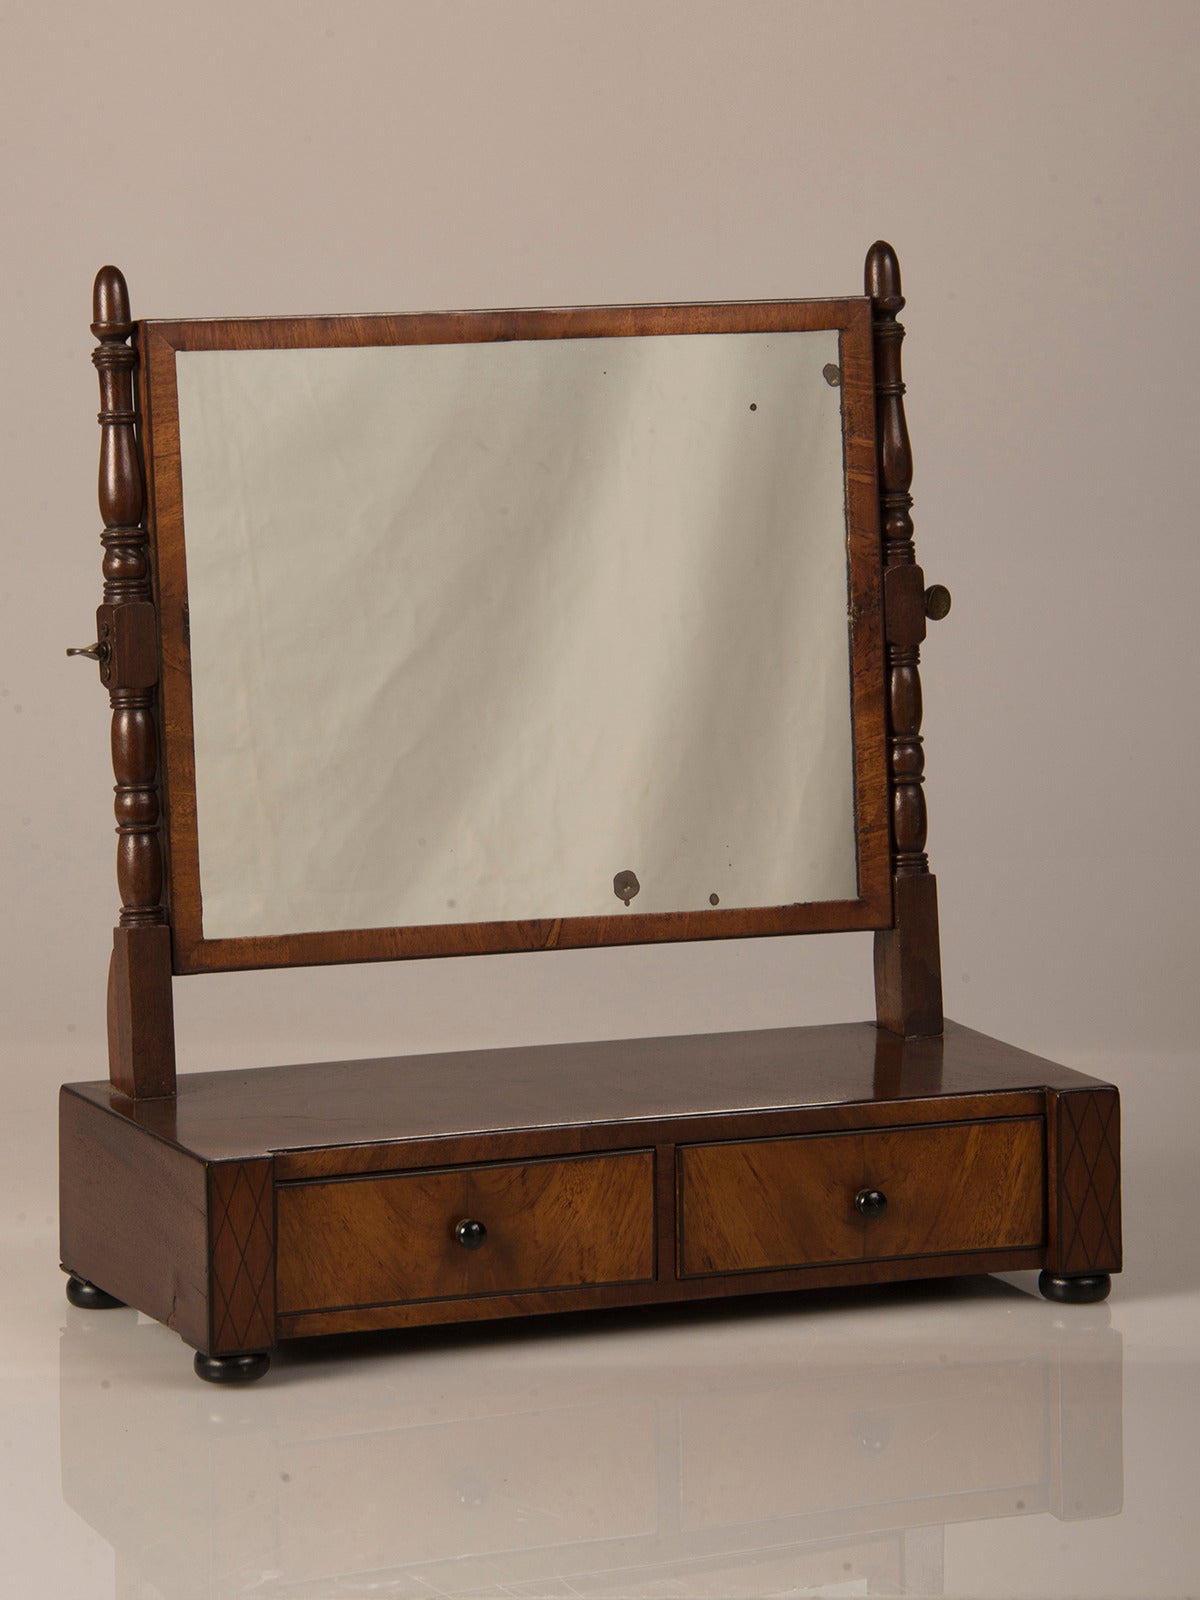 A William IV period mahogany dressing mirror with turned columns, having two drawers and standing on bun feet from England circa 1830.